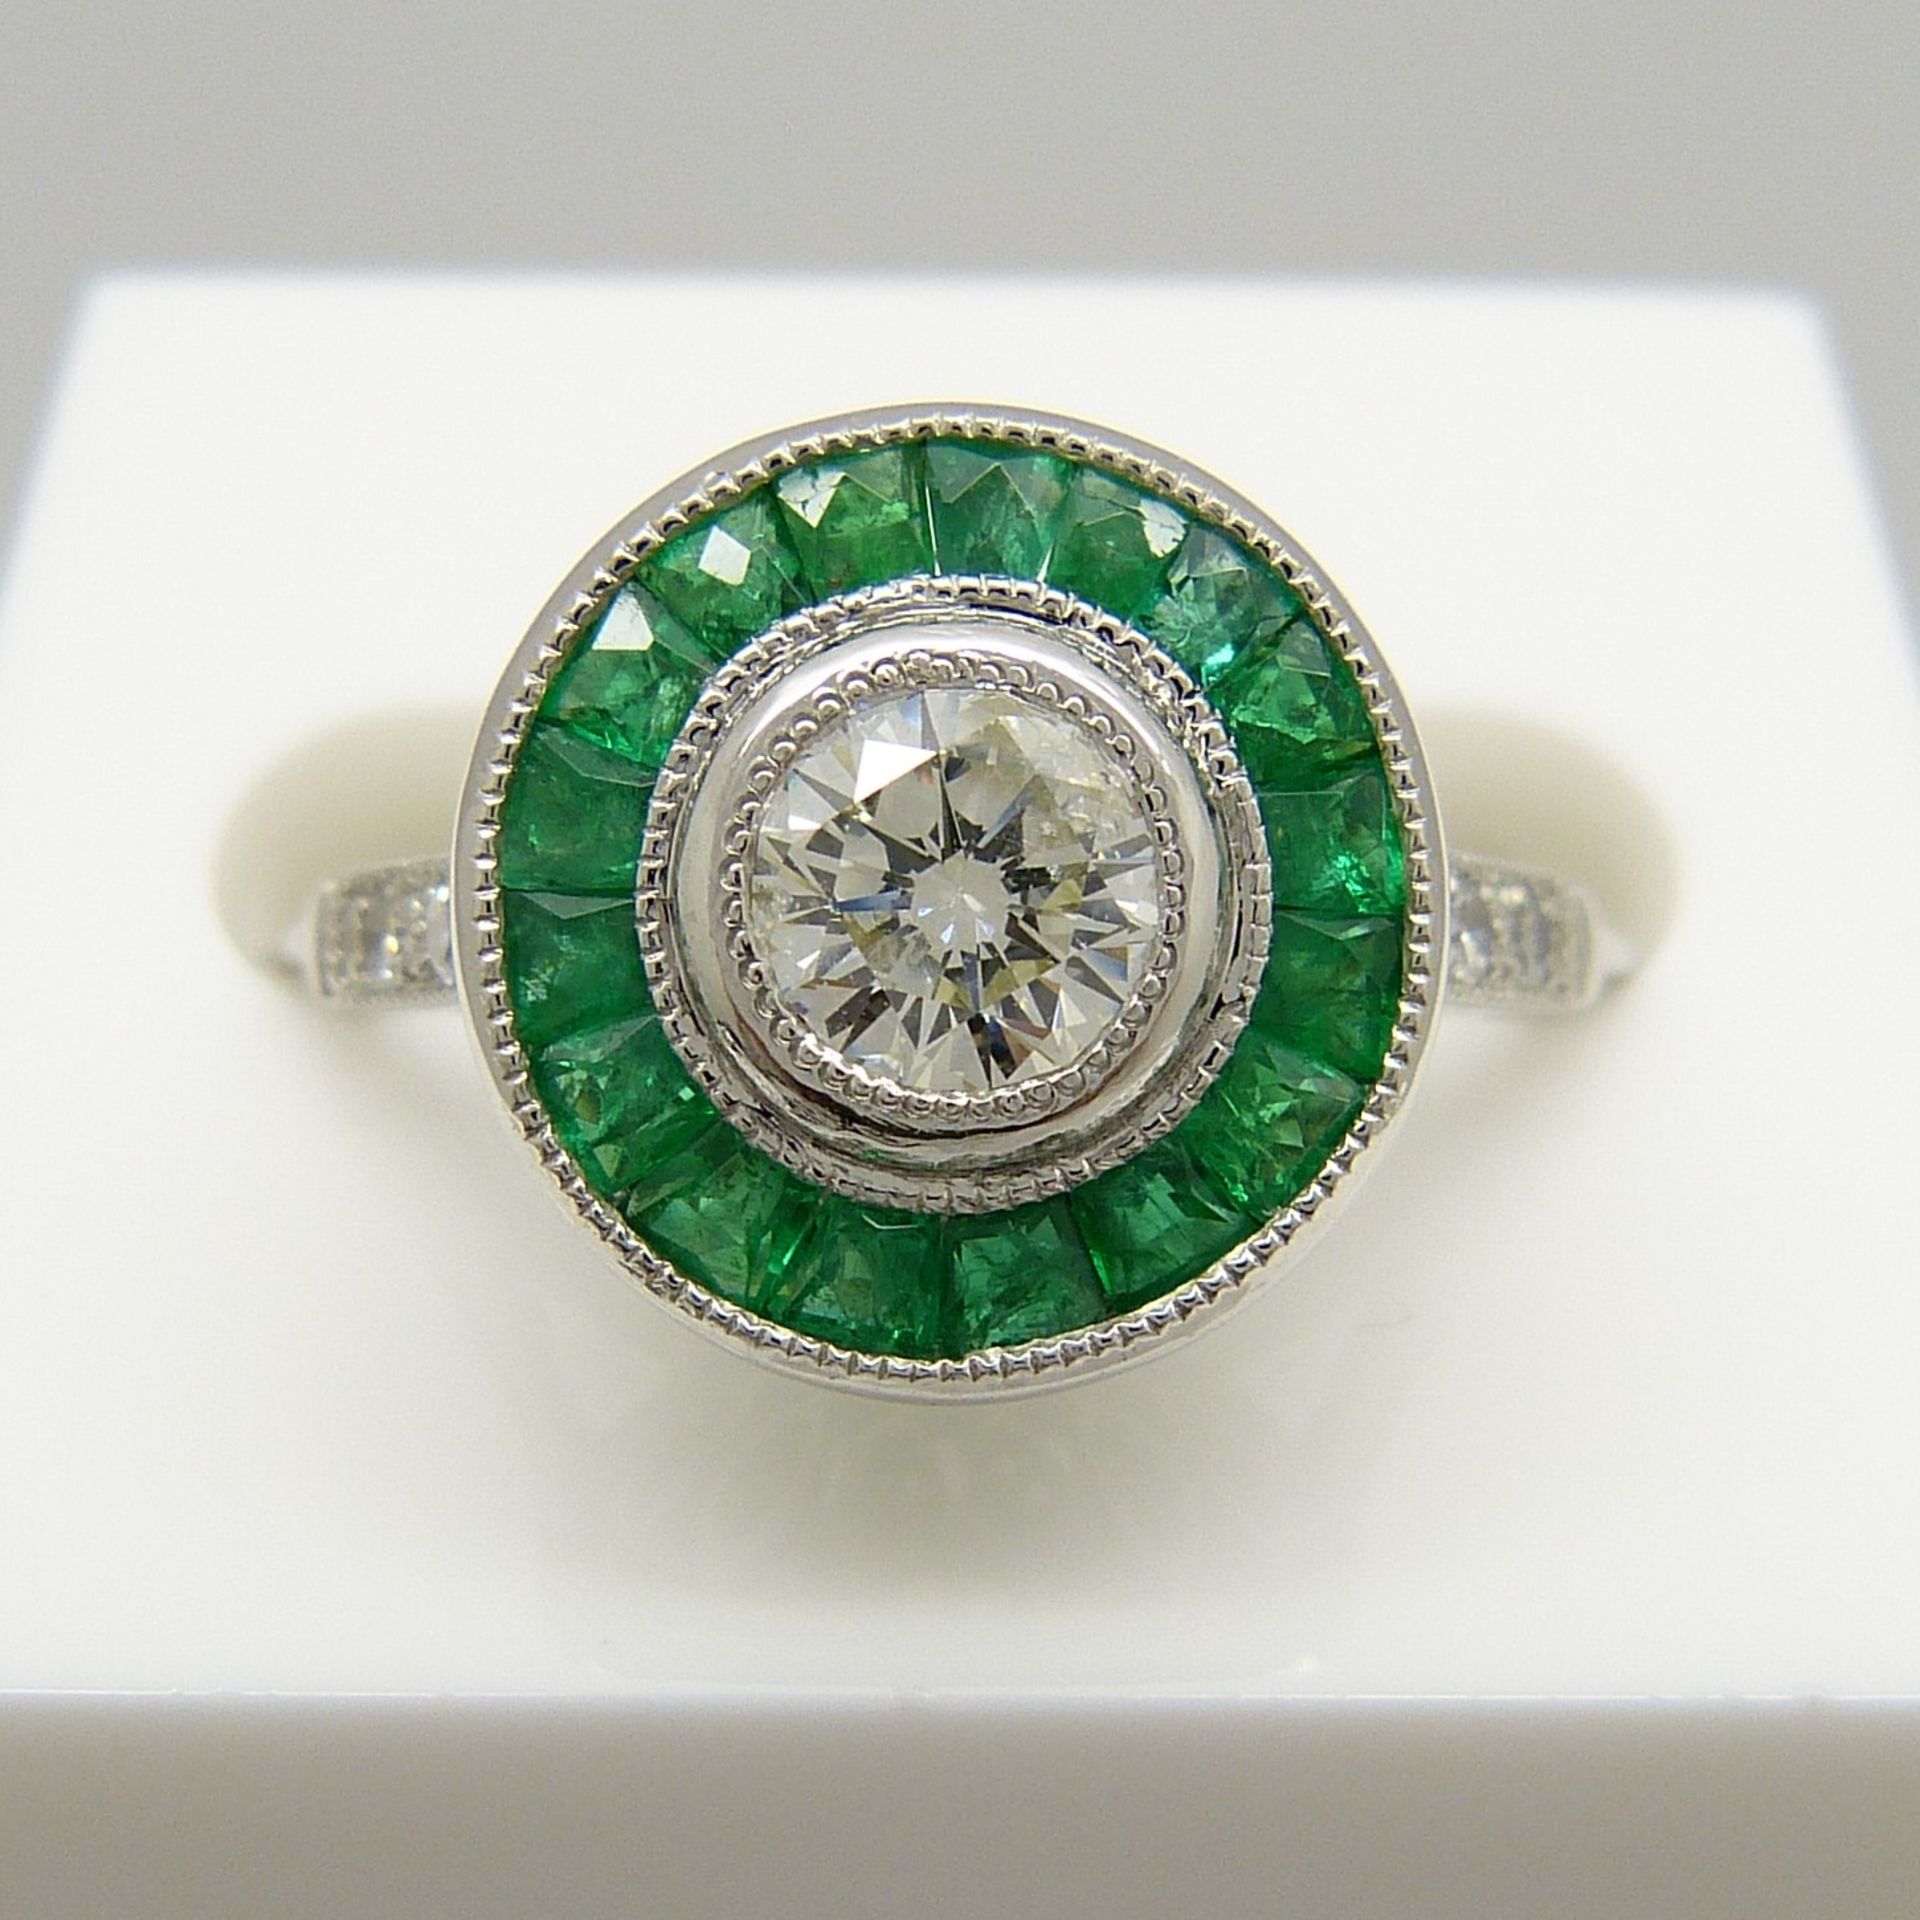 A target-style ring set with round brilliant-cut diamonds and emeralds, platinum